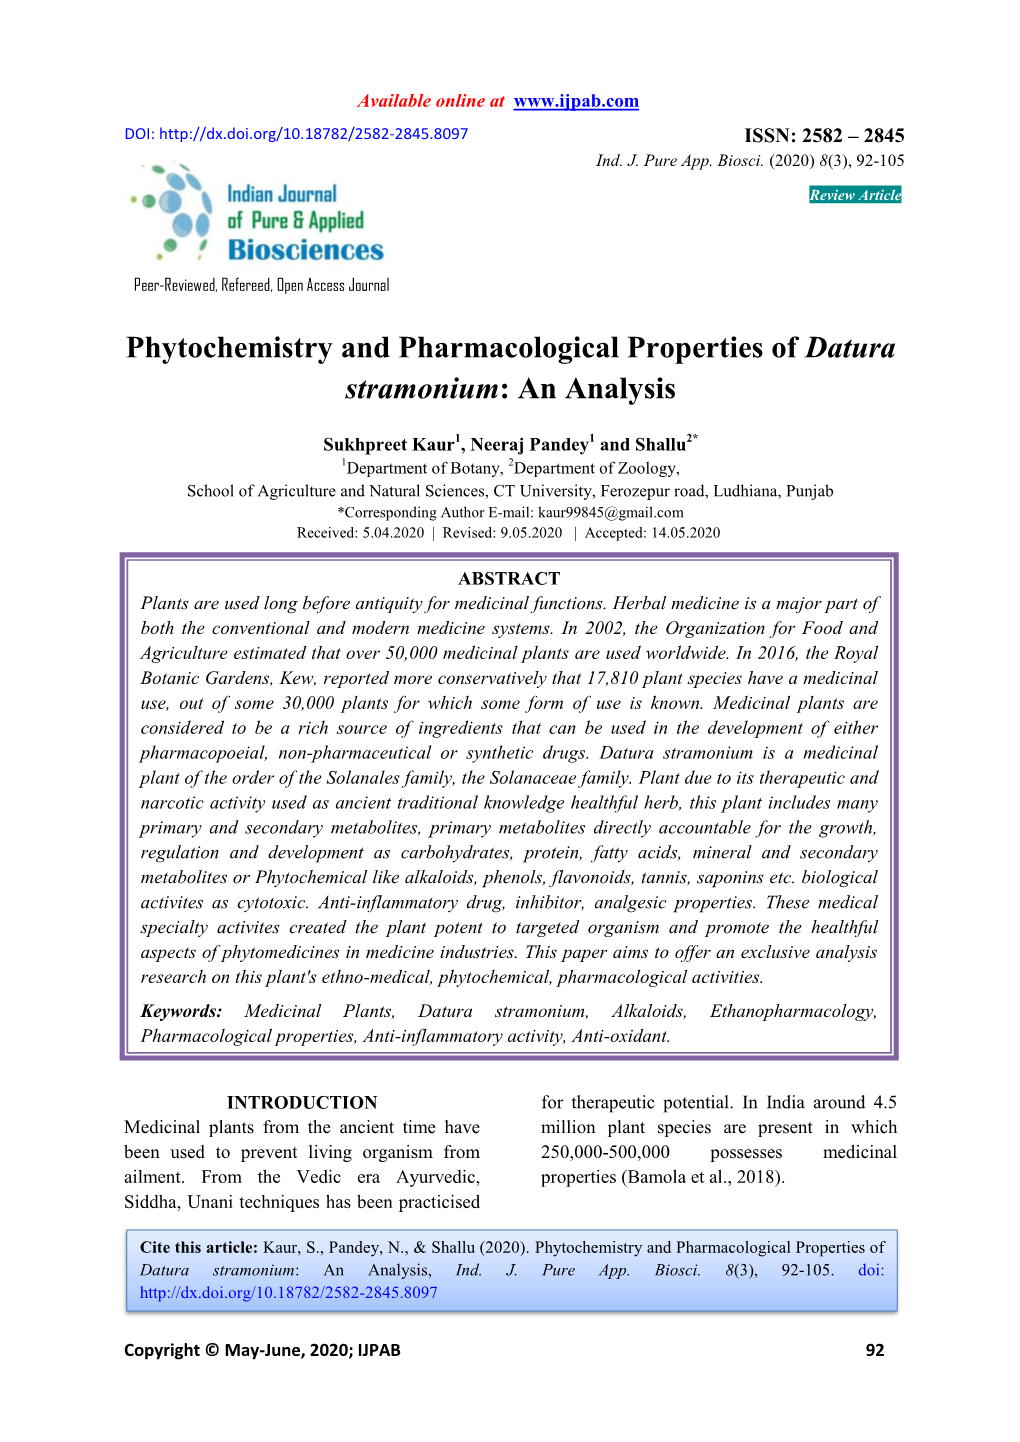 Phytochemistry and Pharmacological Properties of Datura Stramonium: an Analysis